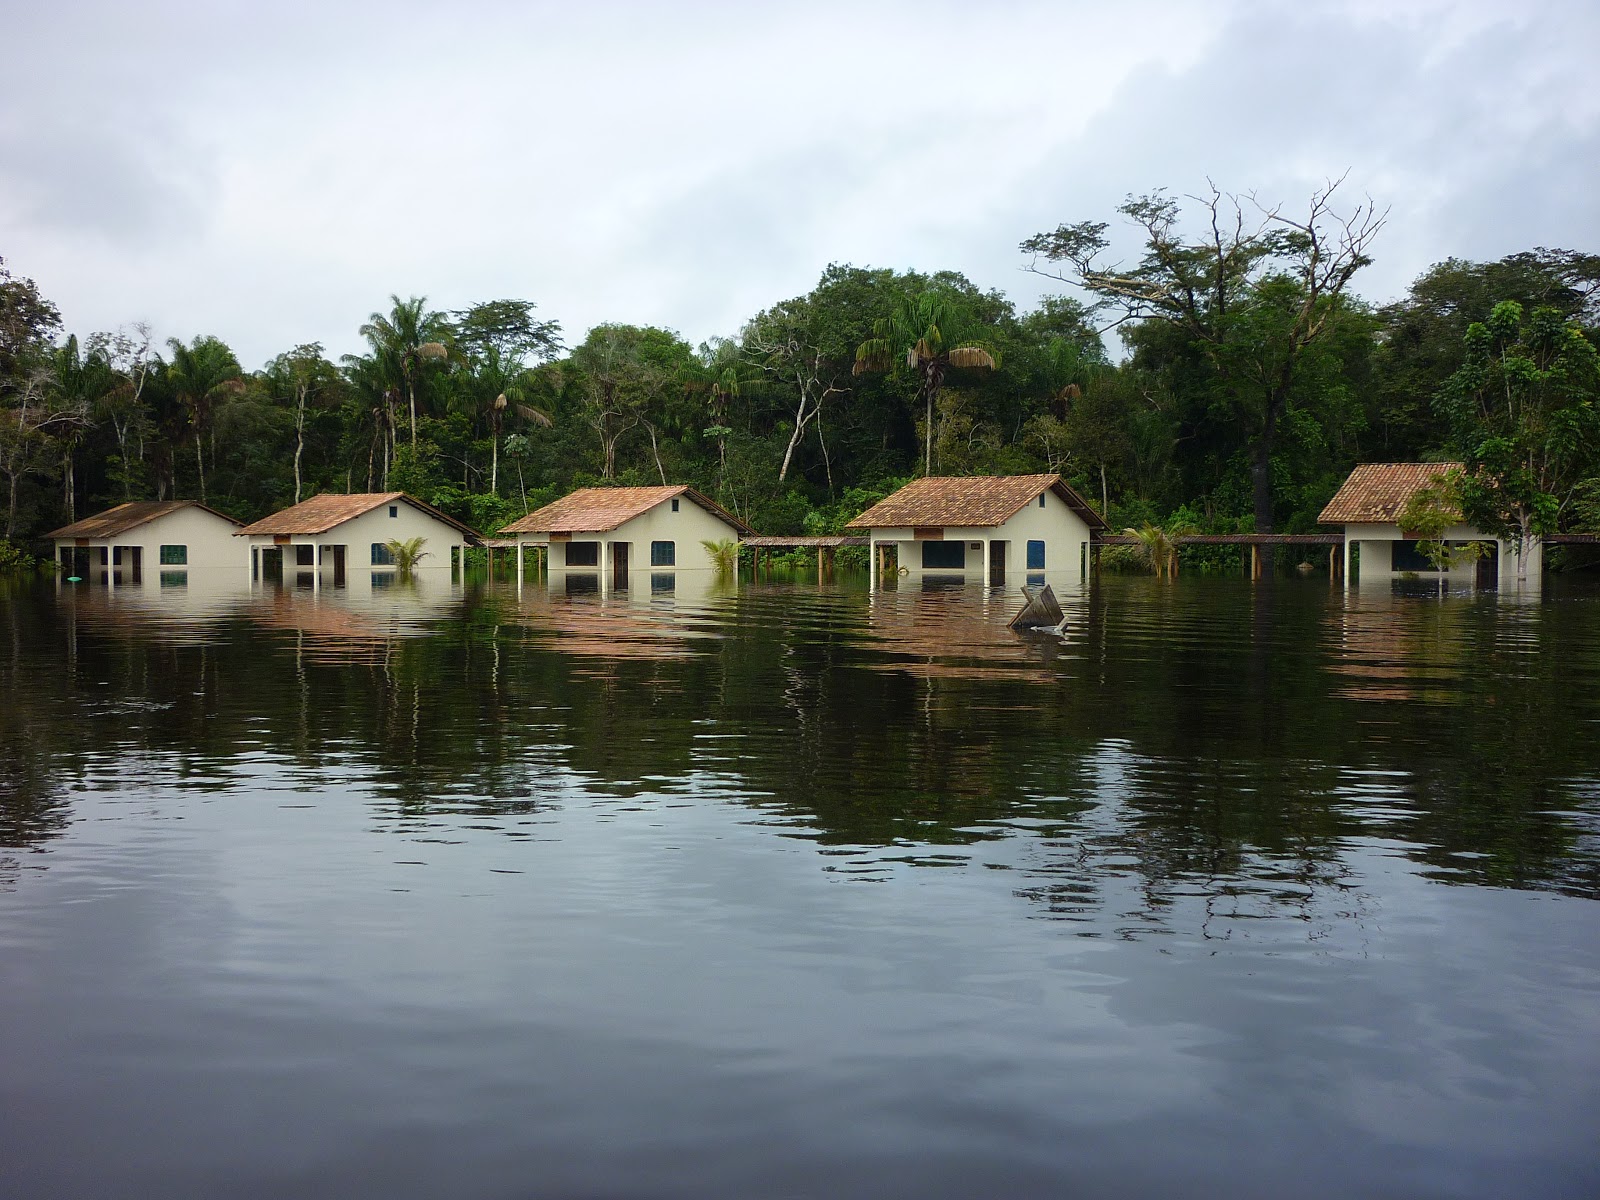 The same cottages with 27 feet more water in the river